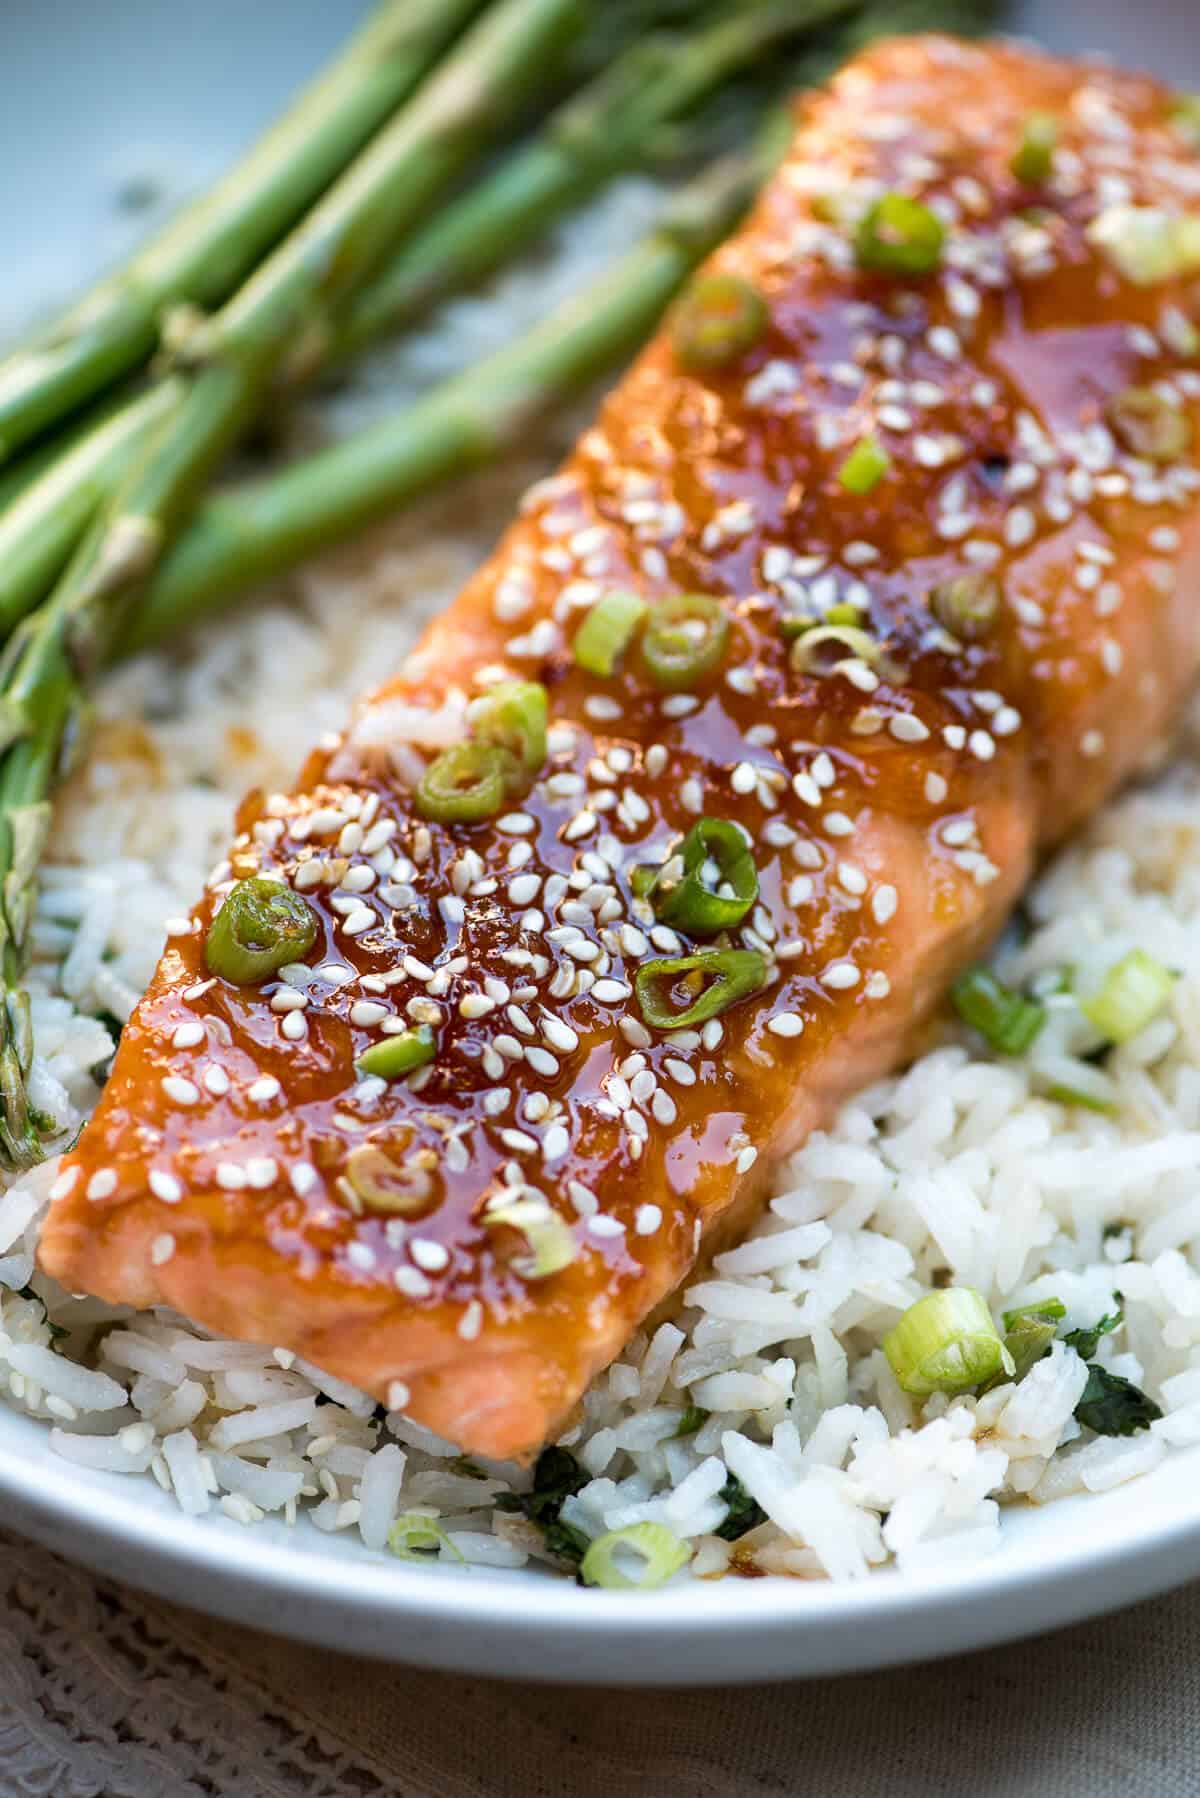 A close up of Asian glazed salmon with sesame seeds on a bed of rice.